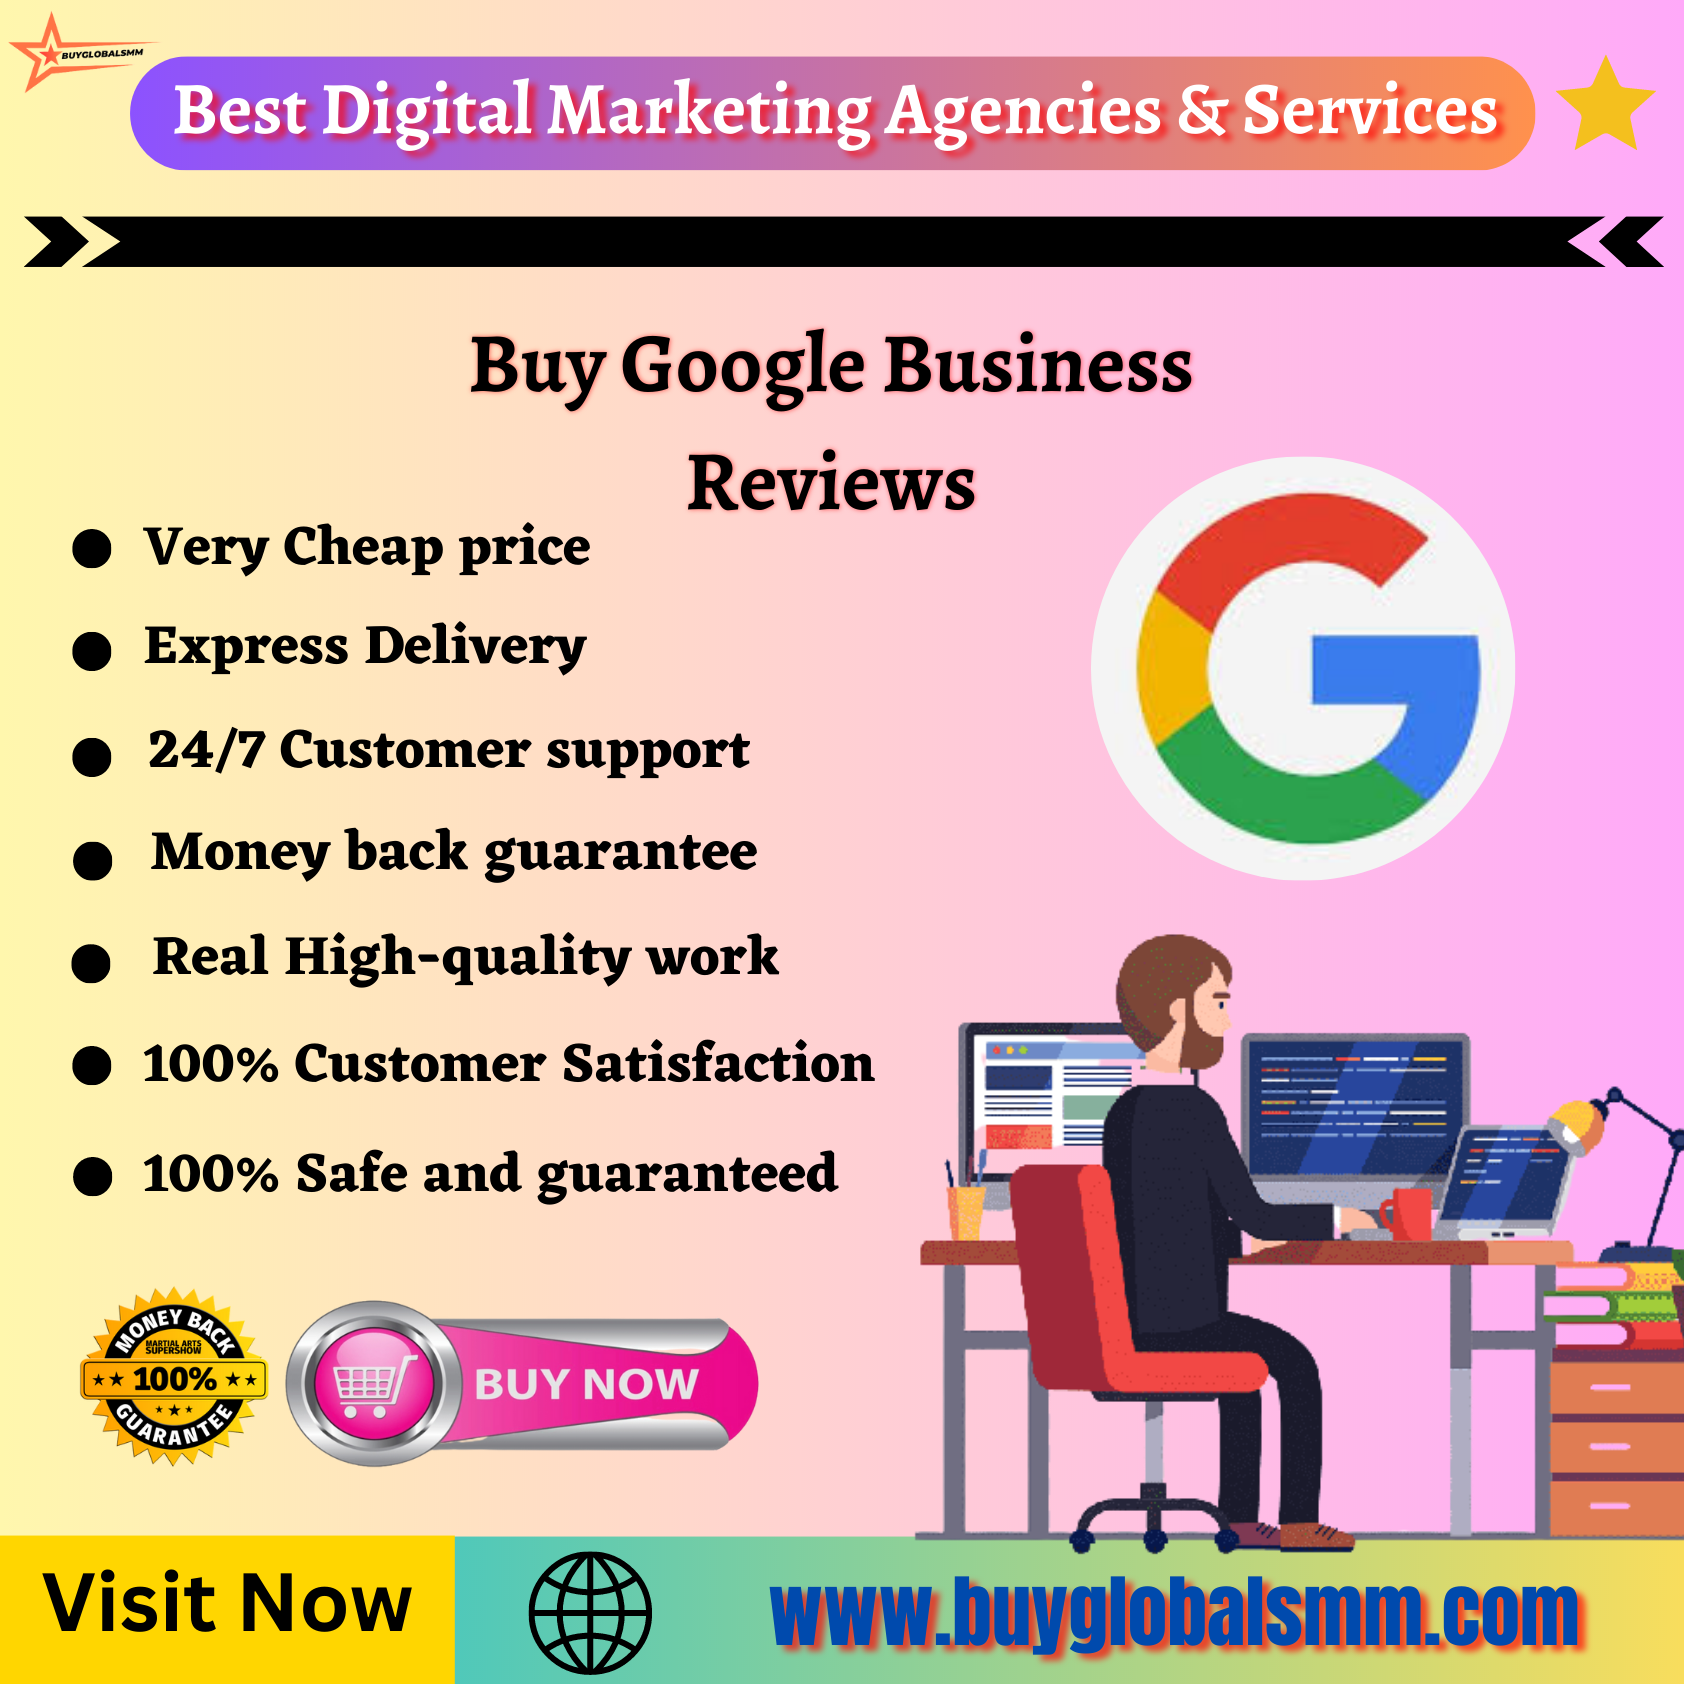 Buy Google Business Reviews-100% trusted service